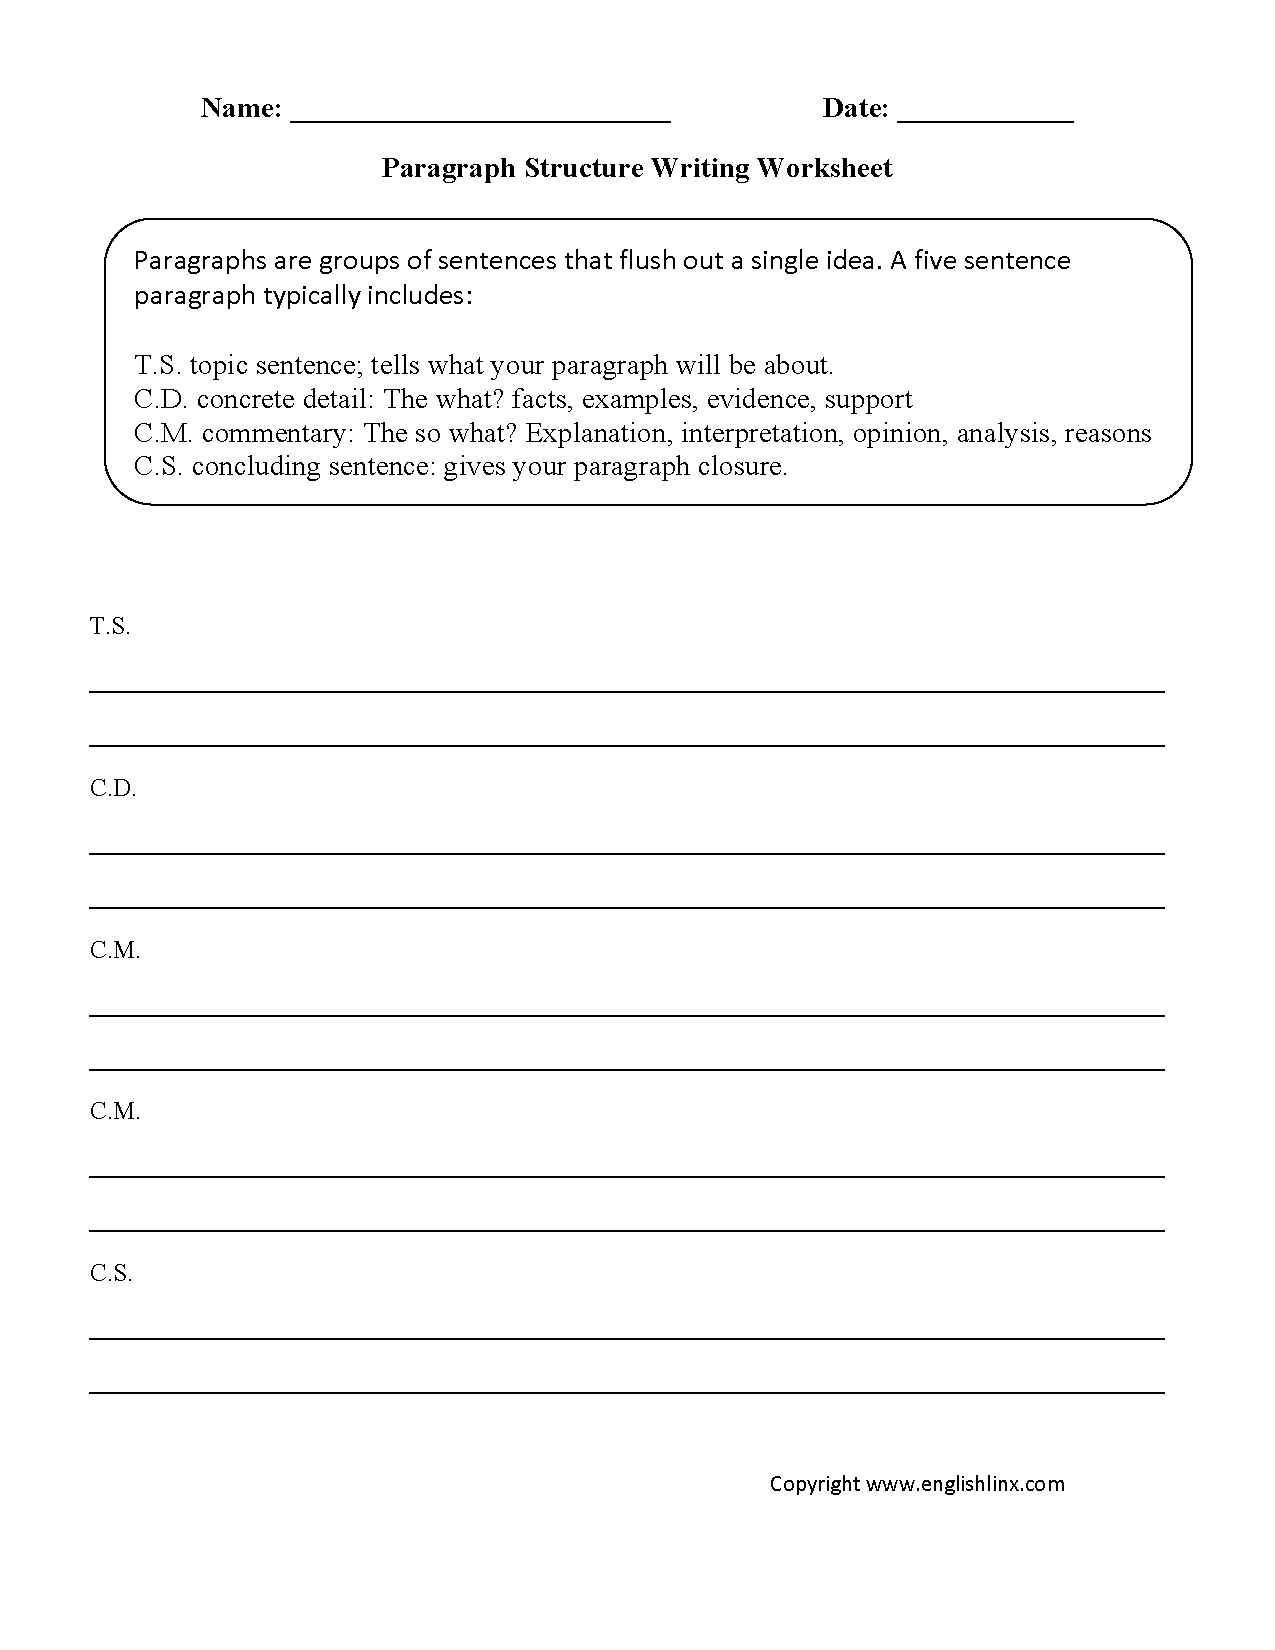 Paragraph Structure Writing Worksheets Paragraph Writing Worksheets 